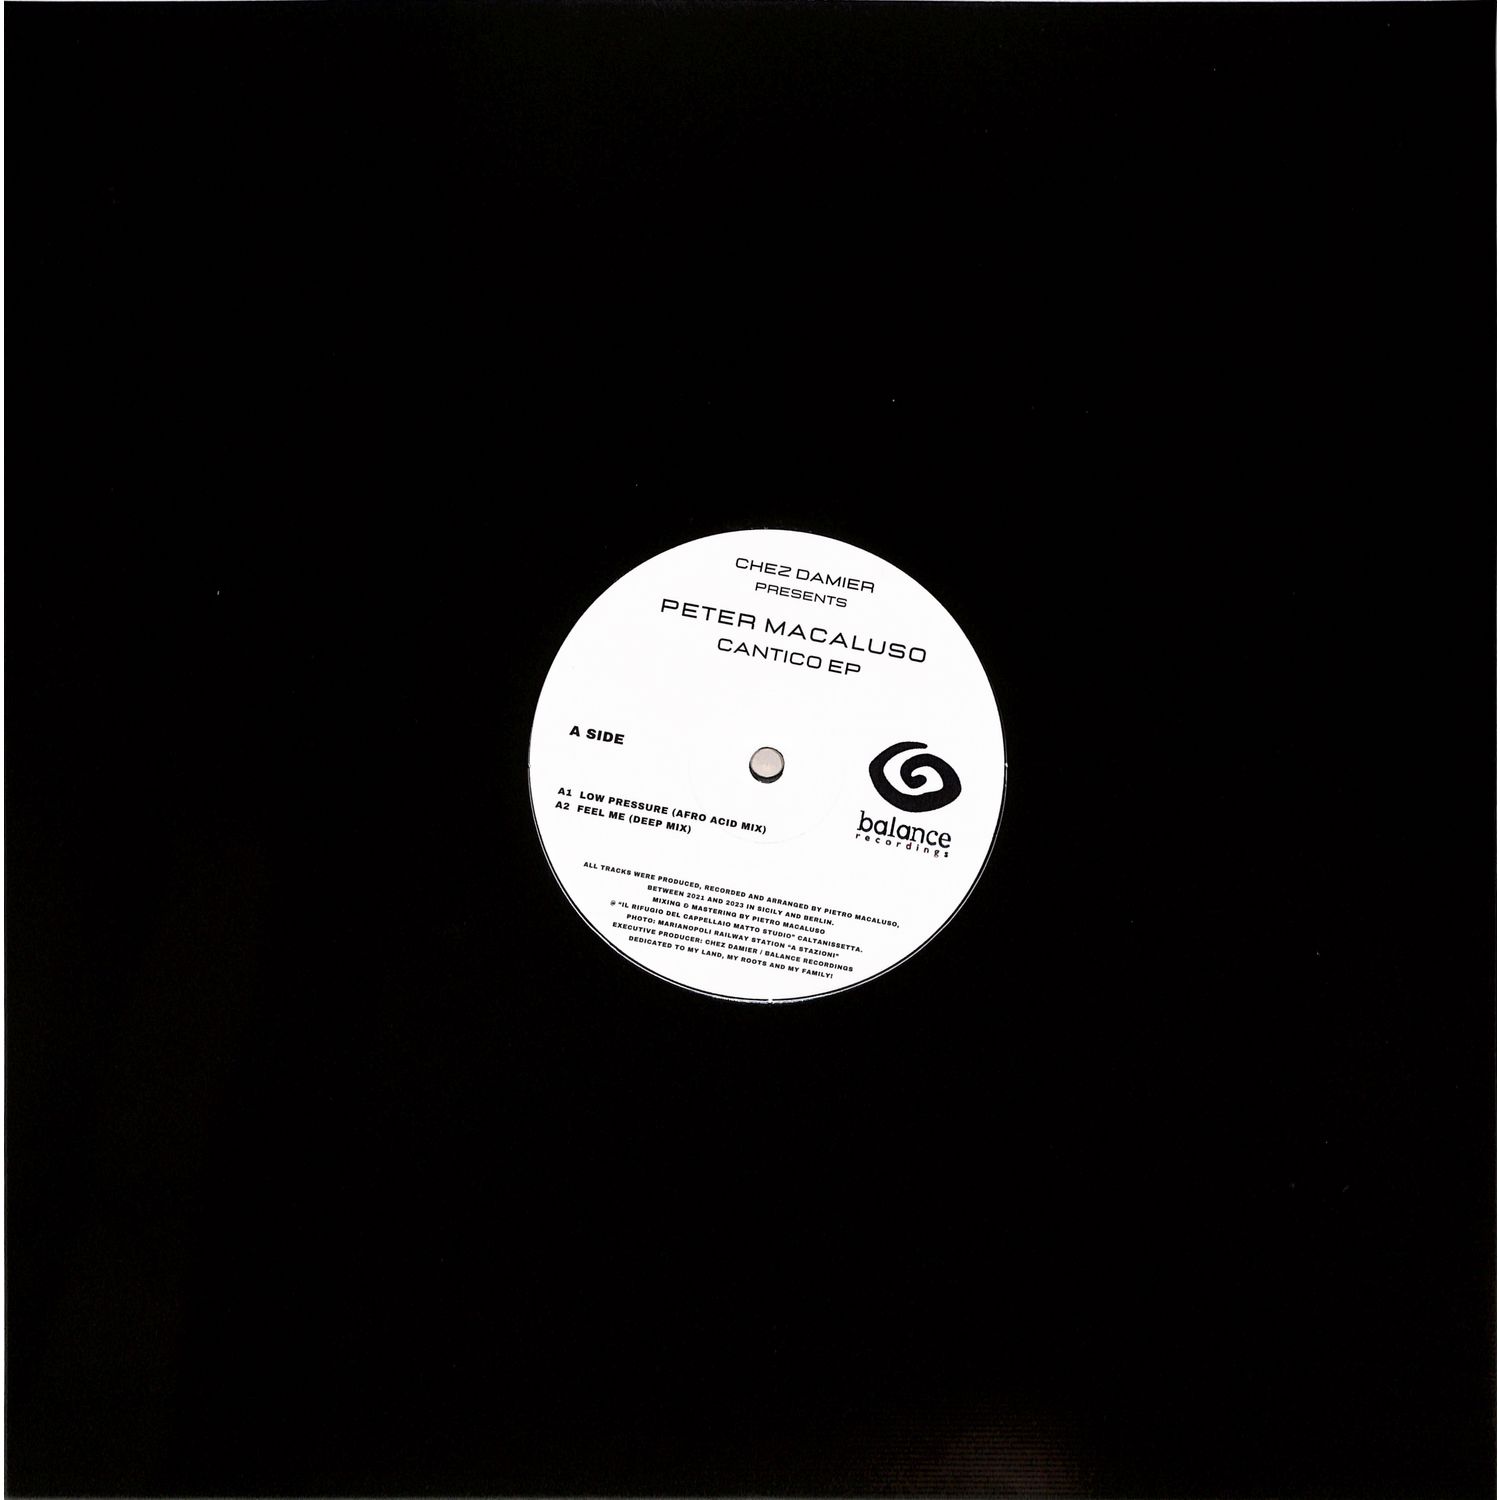 Chez Damier presents Peter Macaluso - CANTICO EP